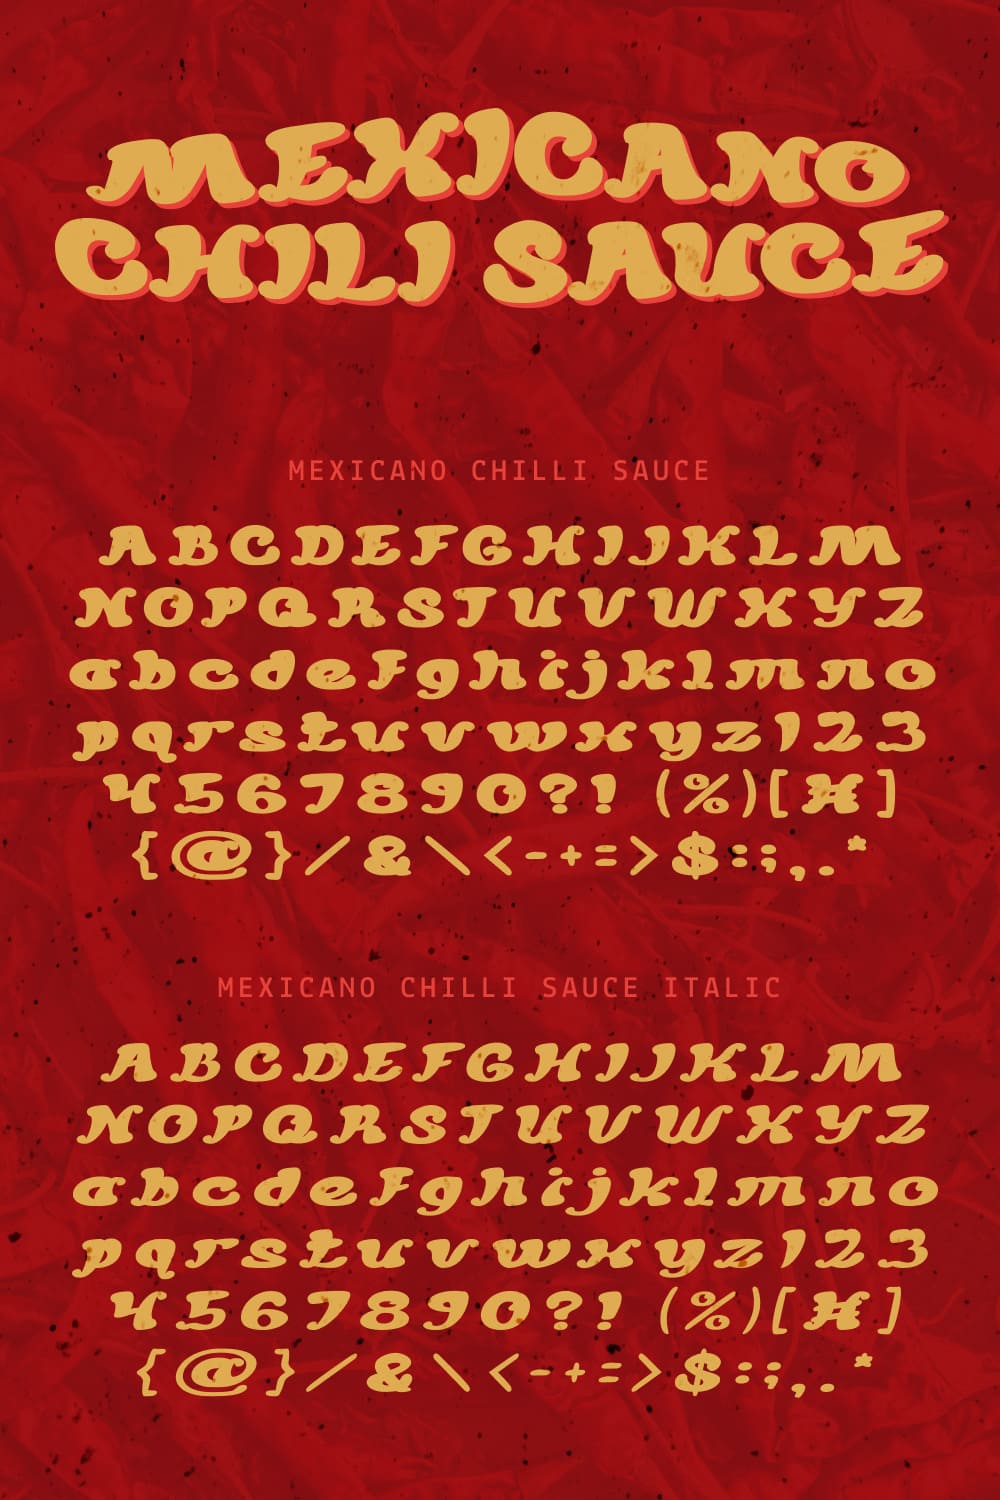 Free mexican font mexicano chili sauce Pinterest collage image by MasterBundles.